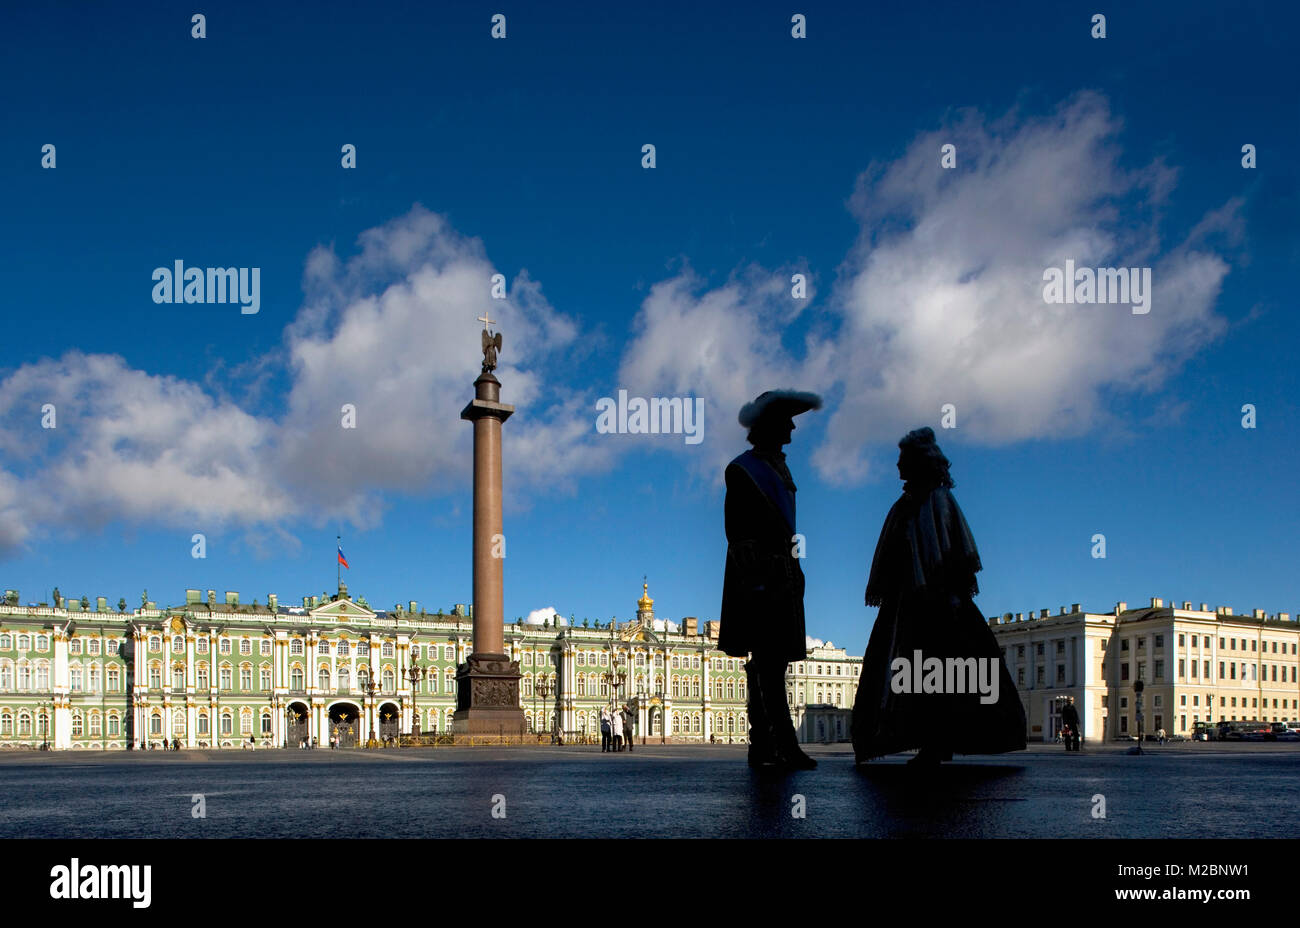 Russia. Saint Petersburg. Alexander pillar, Winter Palace and Hermitage on Palace Square. People in period costume. UNESCO World Heritage Site. Stock Photo